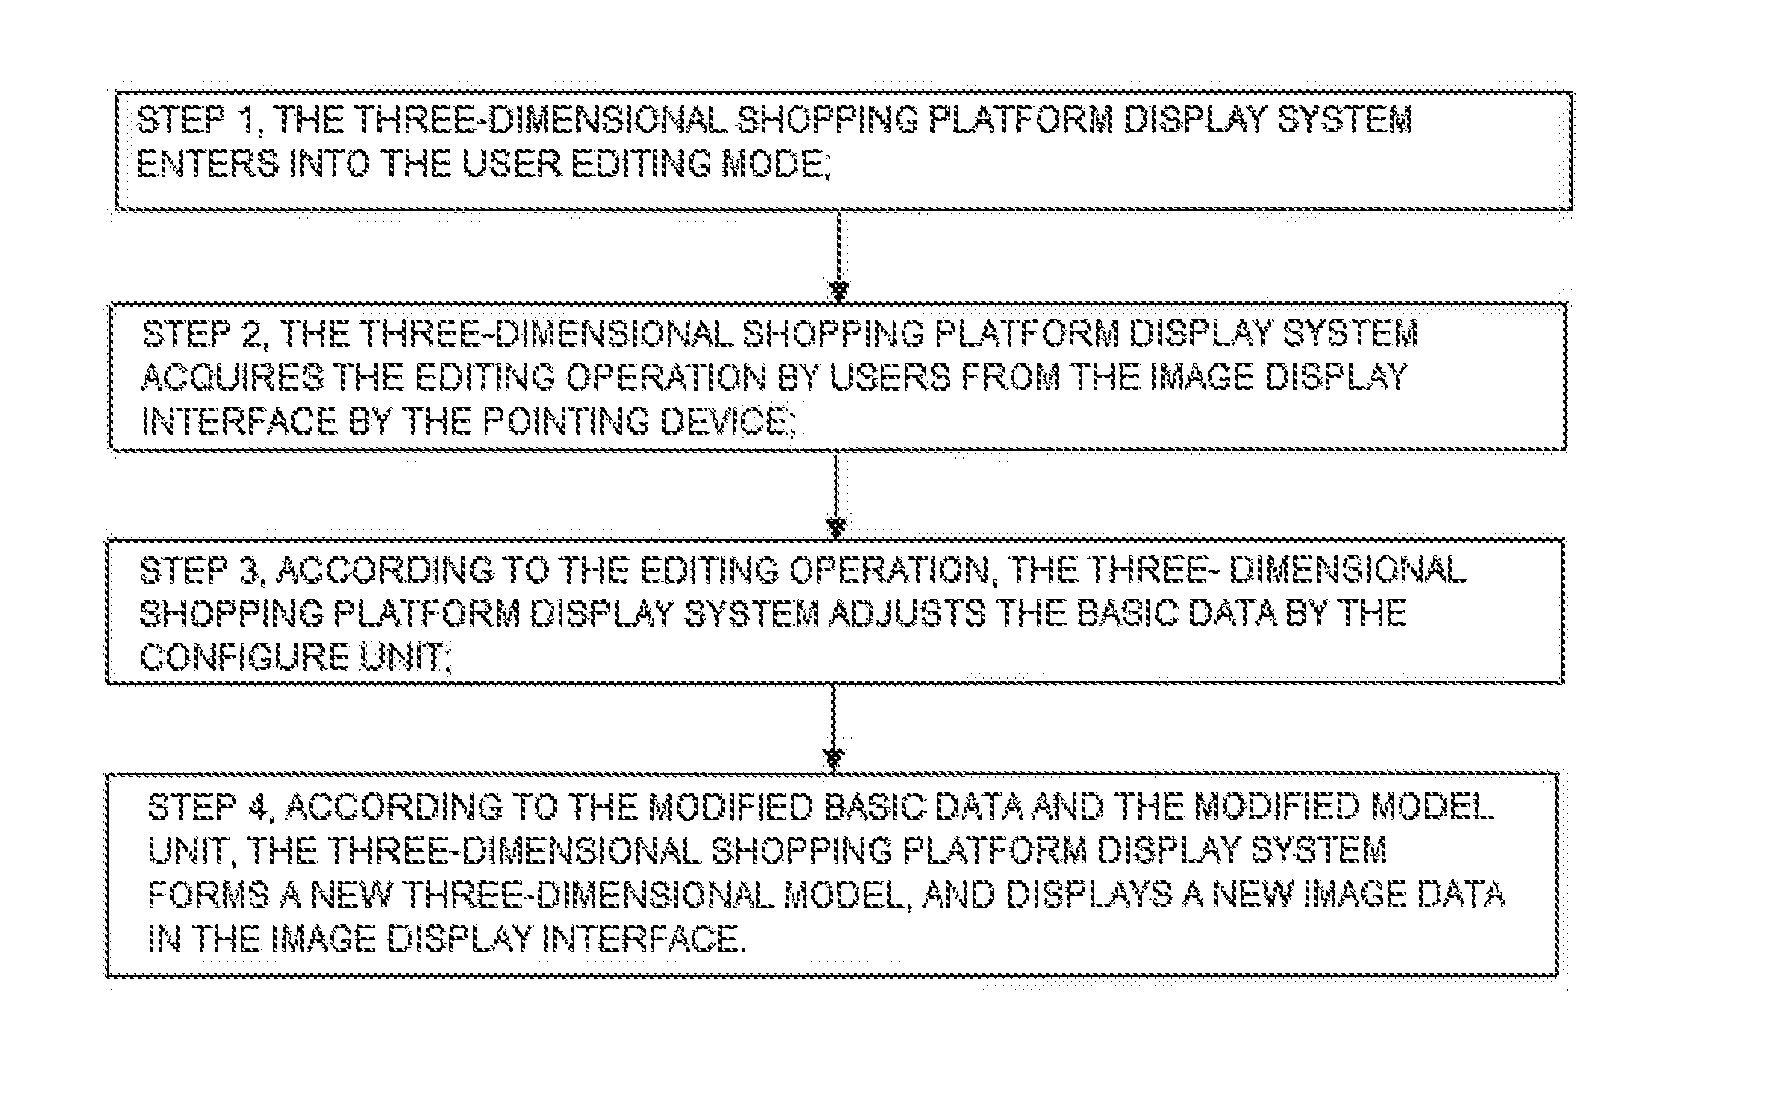 Editing method of the three-dimensional shopping platform display interface for users